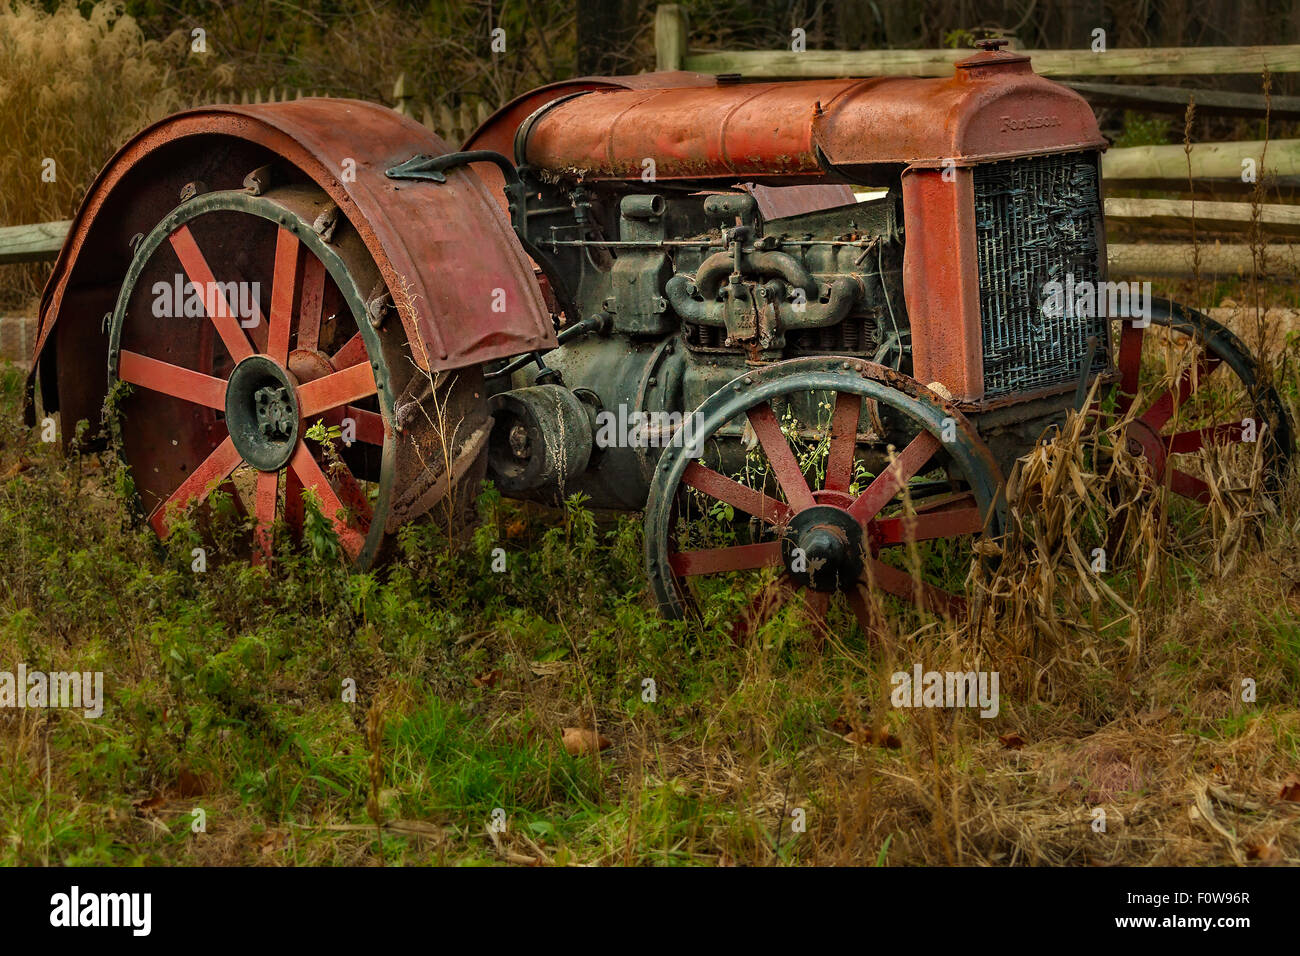 Fordson agricultural tractor from the early 1900's in a country farm. Stock Photo